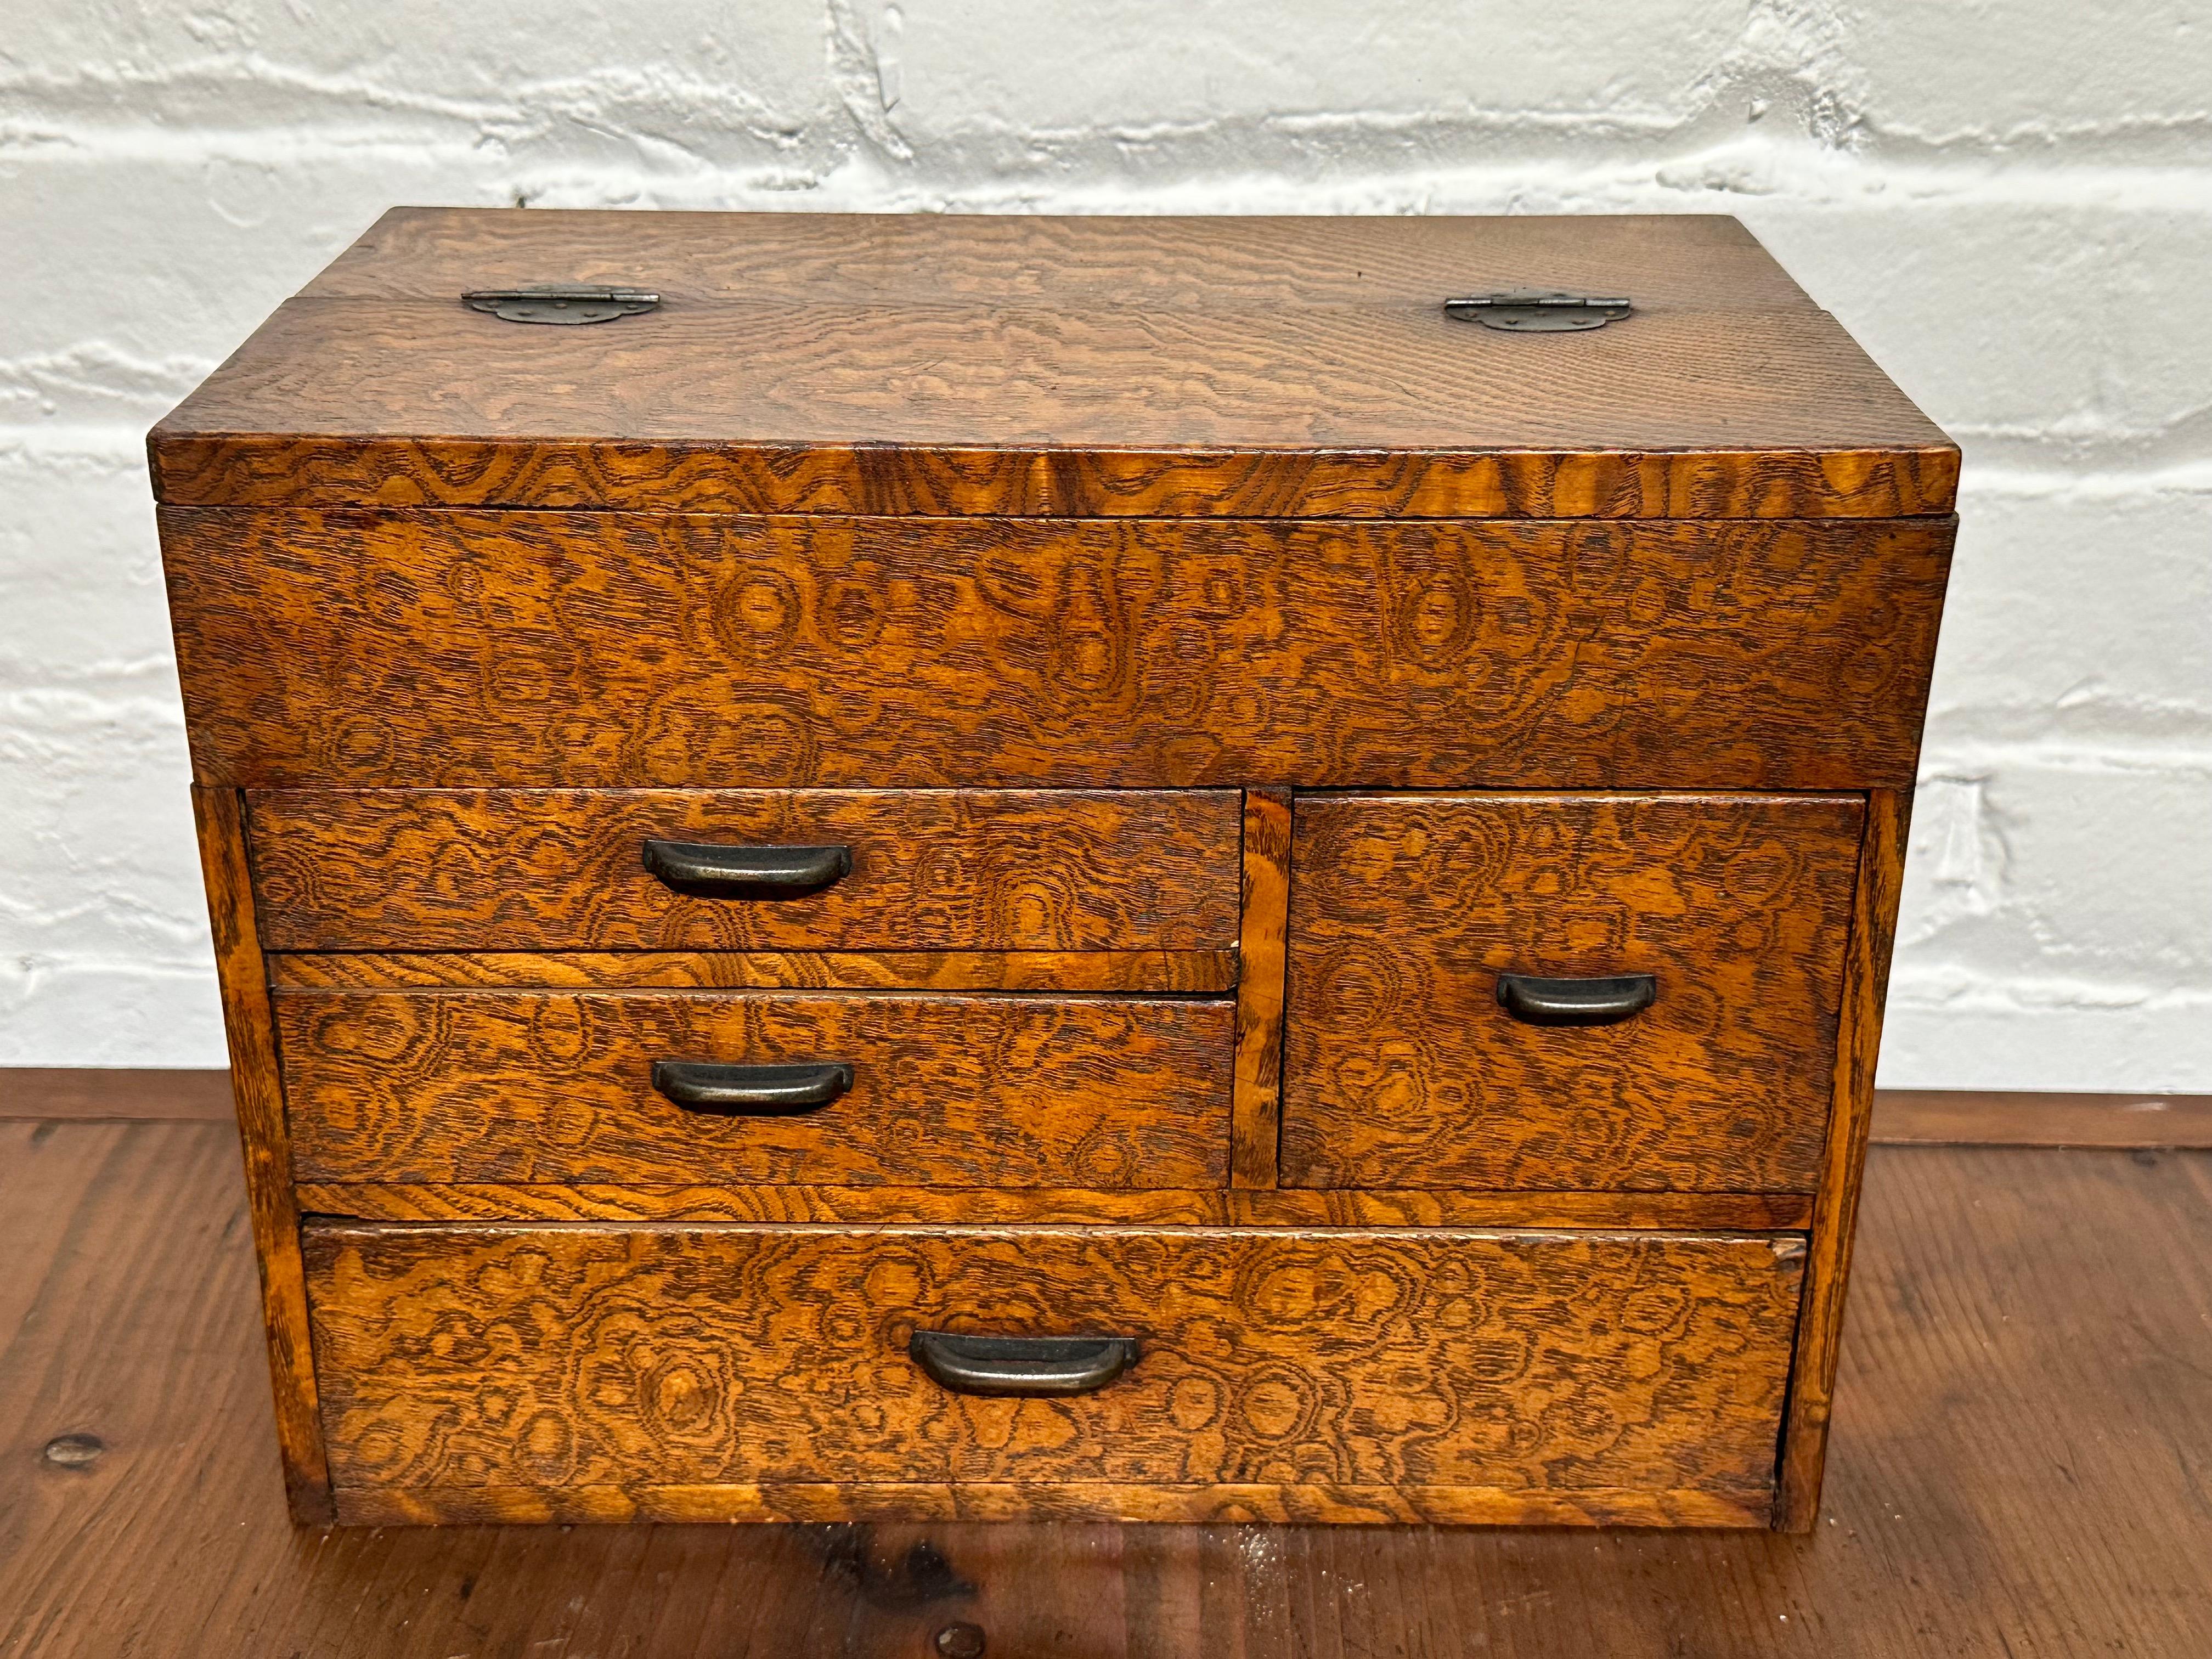 Available from Shogun's Gallery in Portland, Oregon for over 40 years specializing in Asian Arts & Antiques.

This is a Taisho era (c1920's) Haribako (sewing box) with an arrangement of four exterior drawers. The lidded top section is divided into